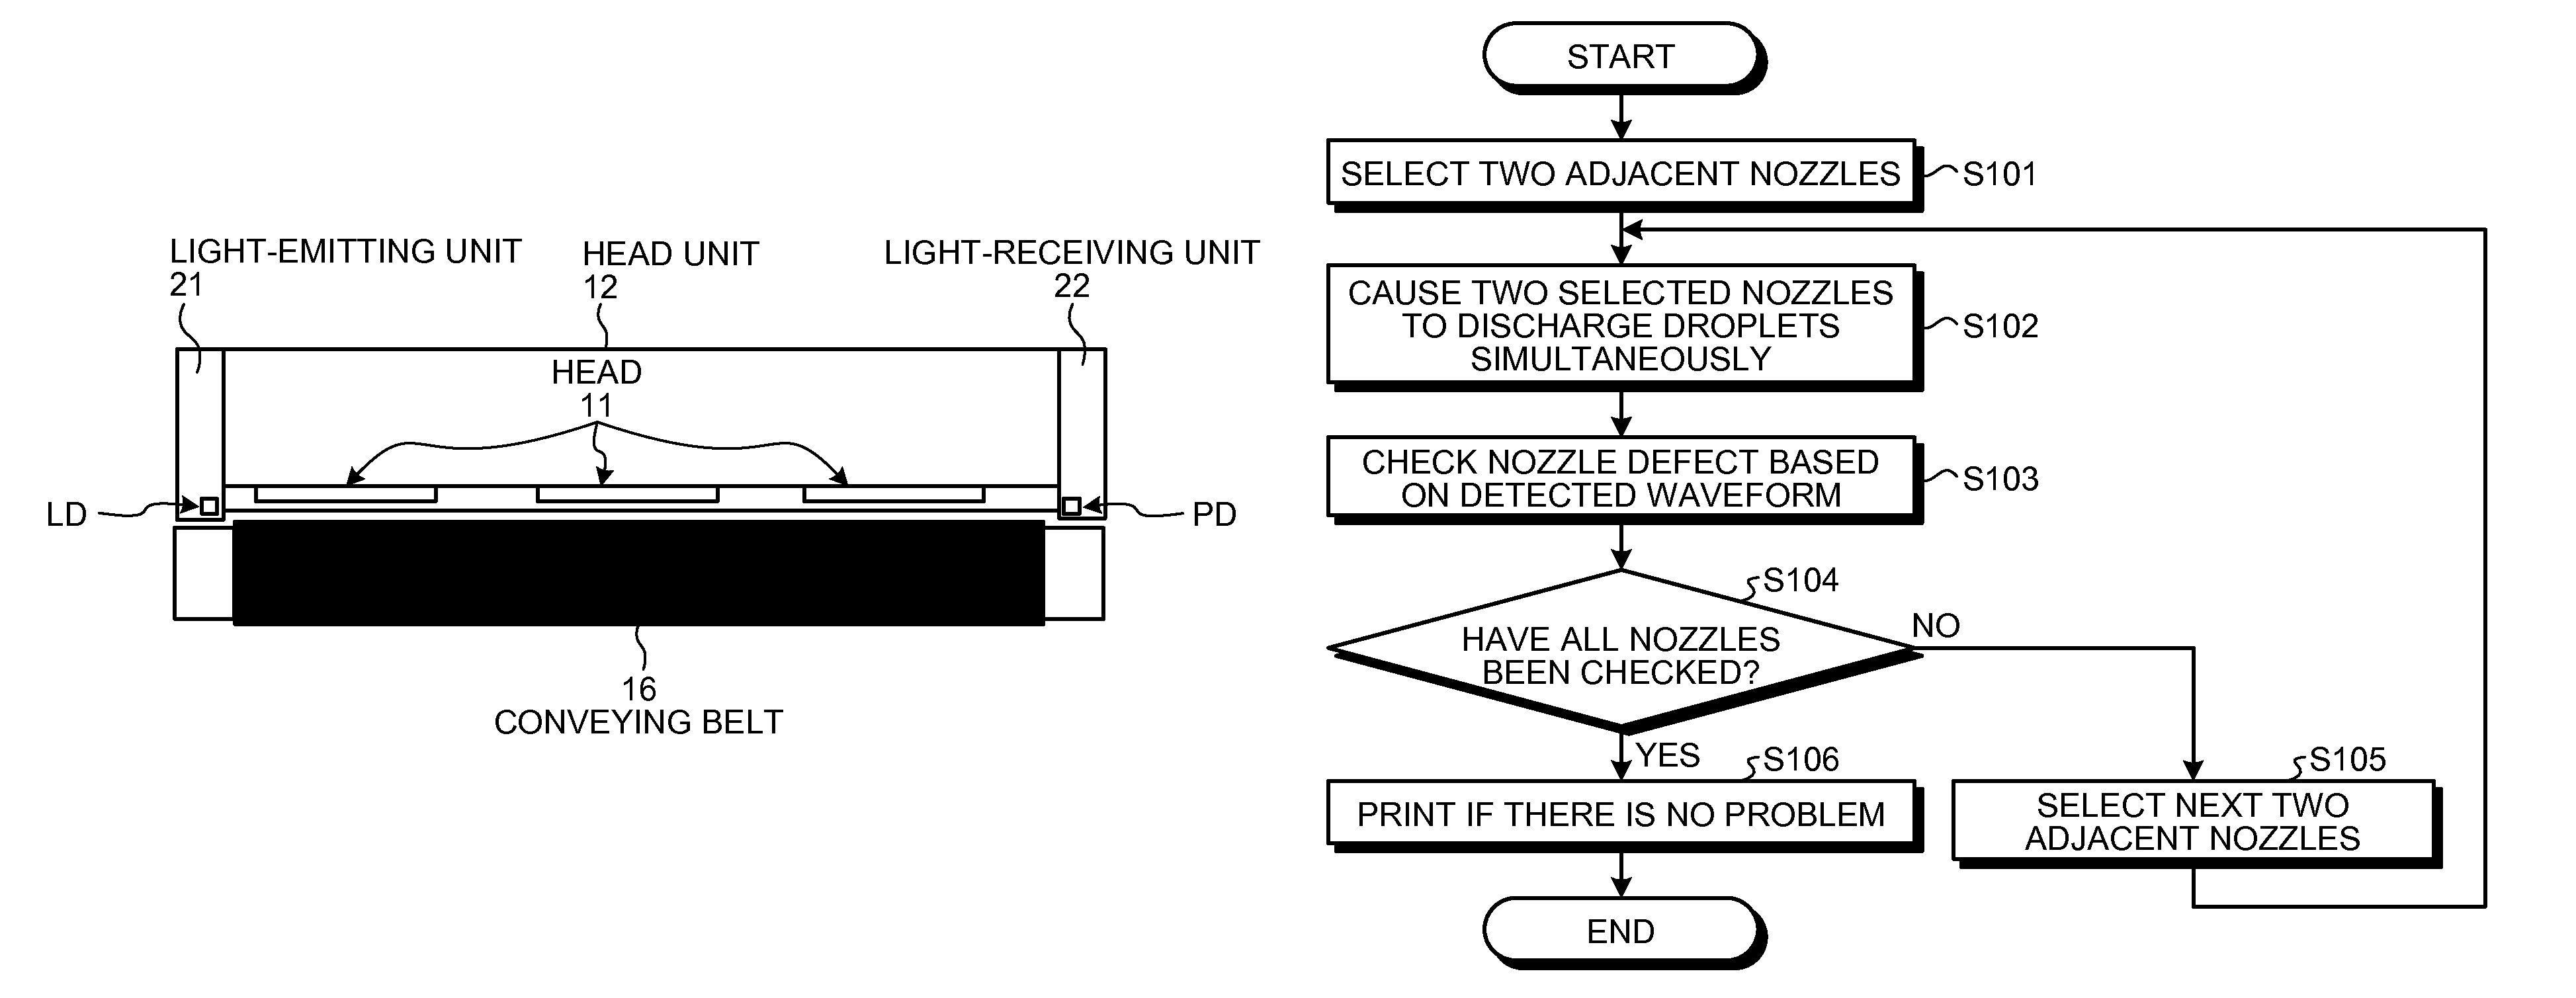 Image forming apparatus, droplet discharge detecting method in the image forming apparatus, and computer program product